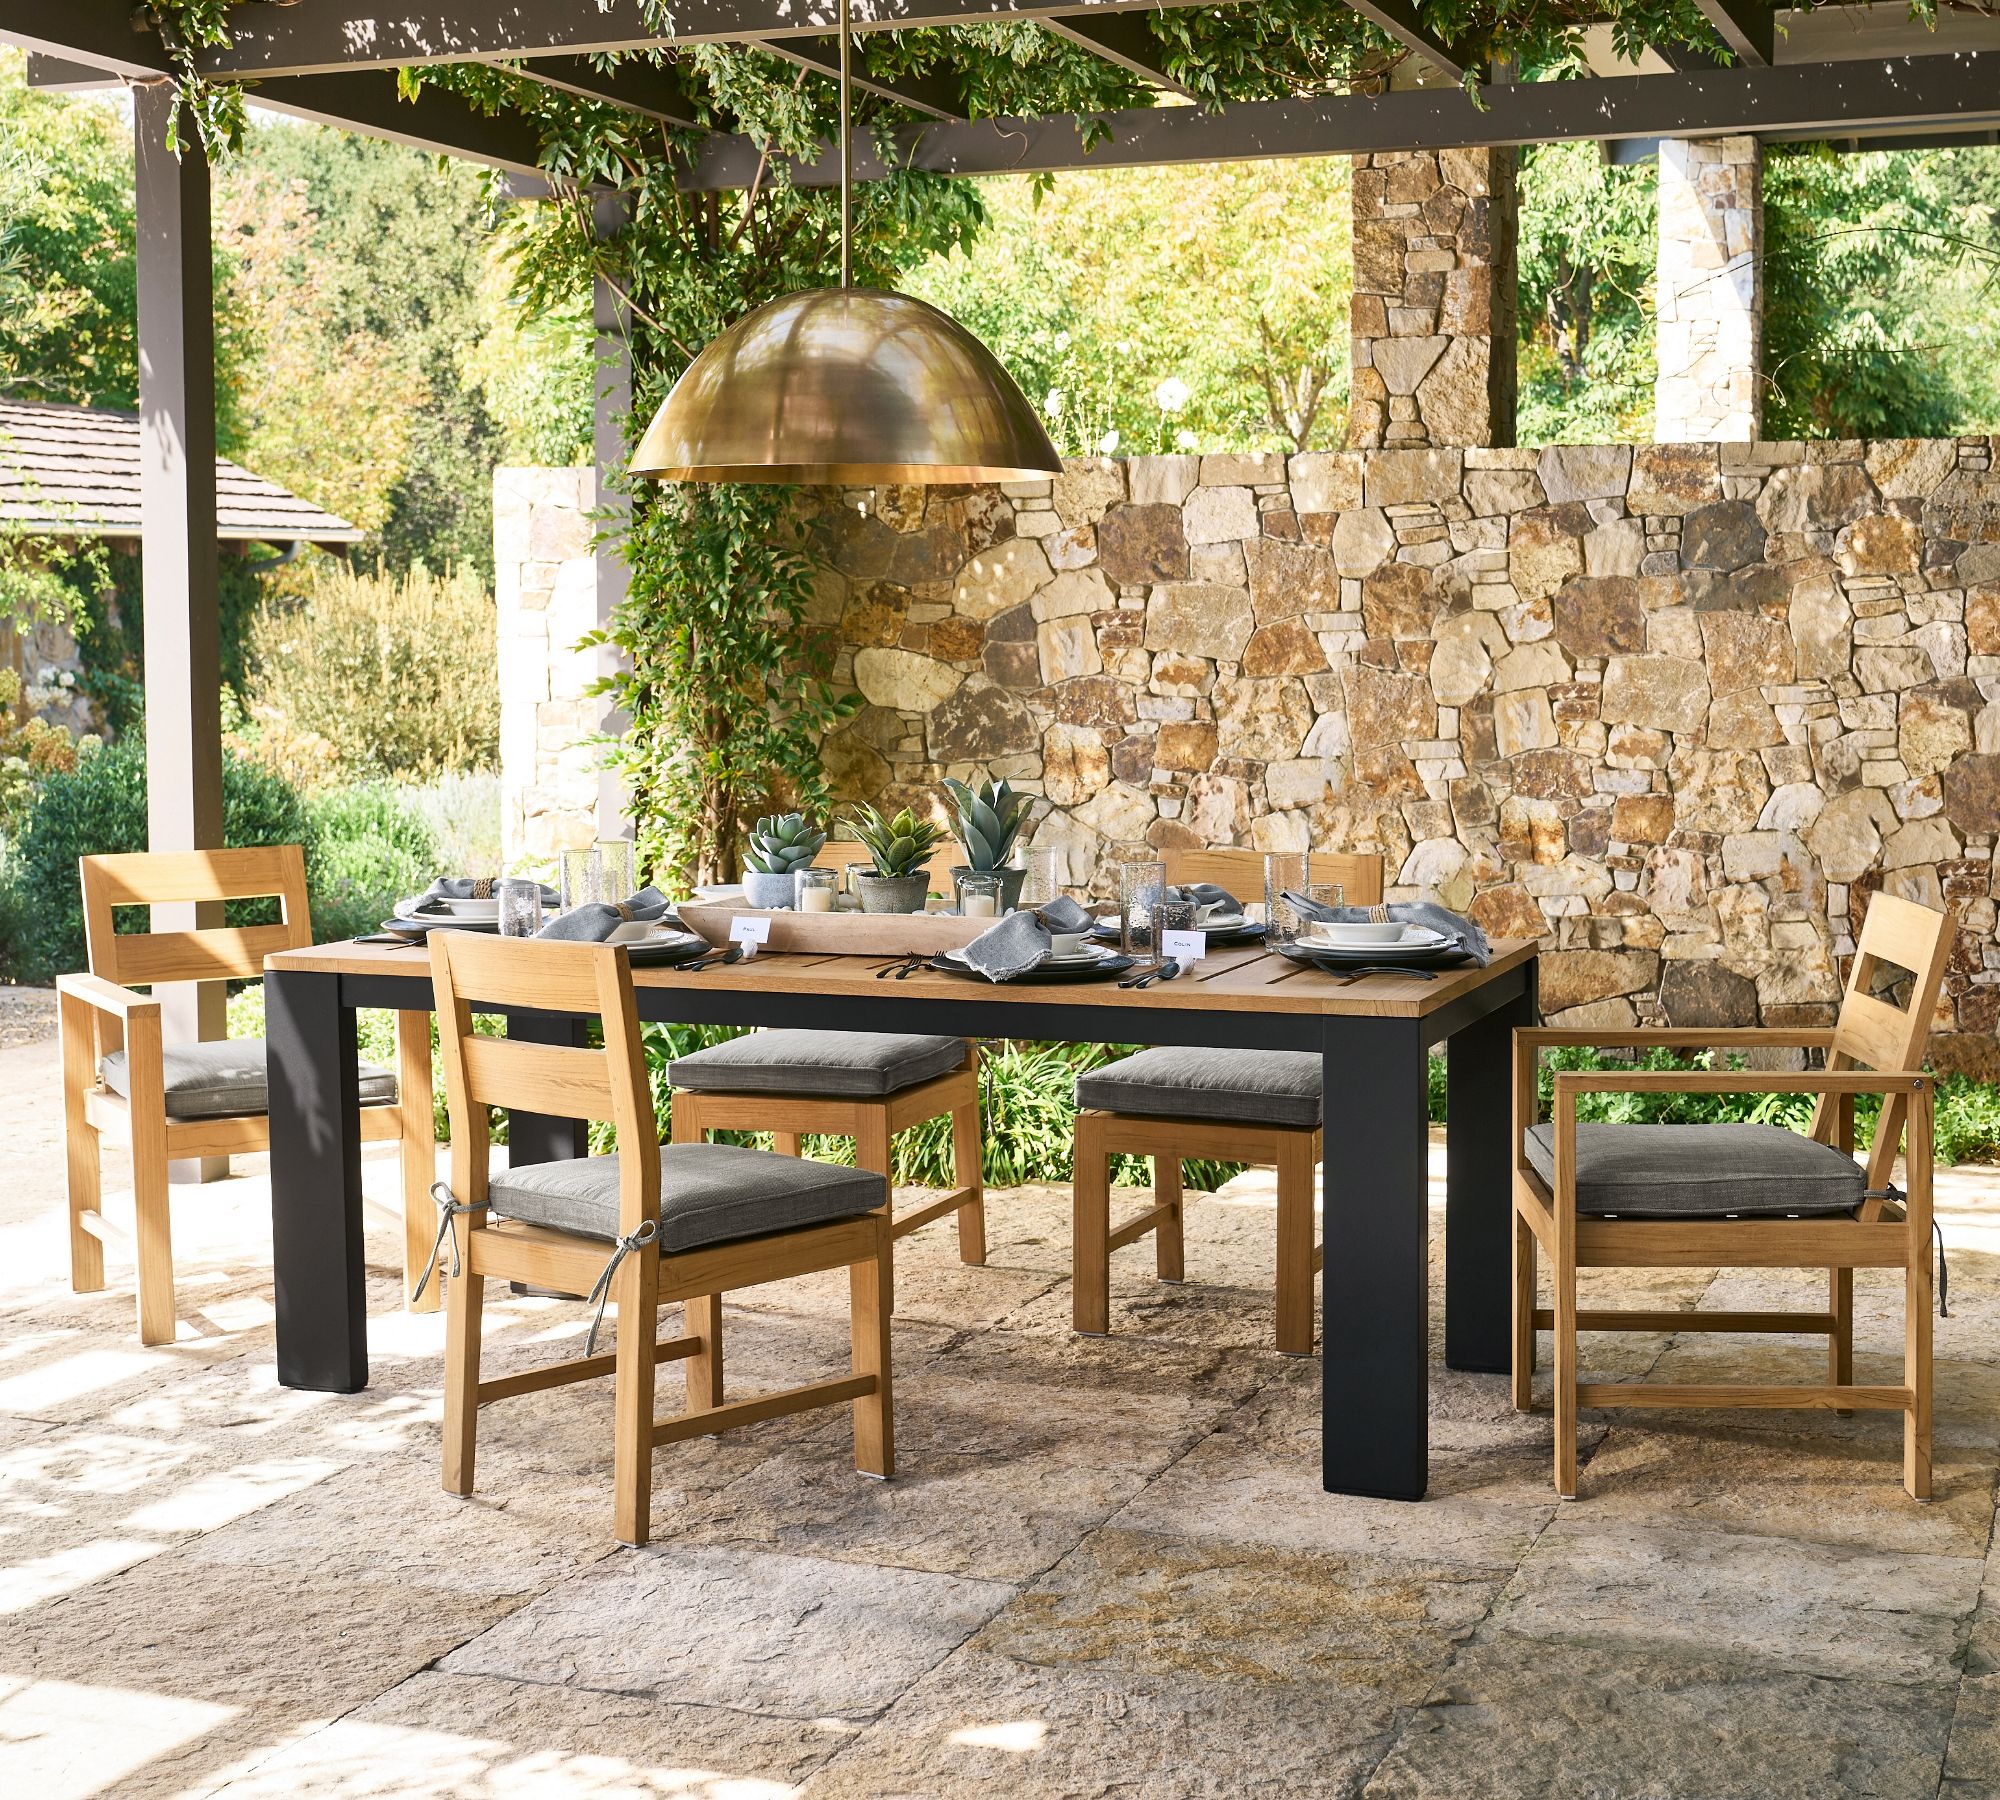  Teak Outdoor Dining Table Collection of Pottery Barn's patio dining sets